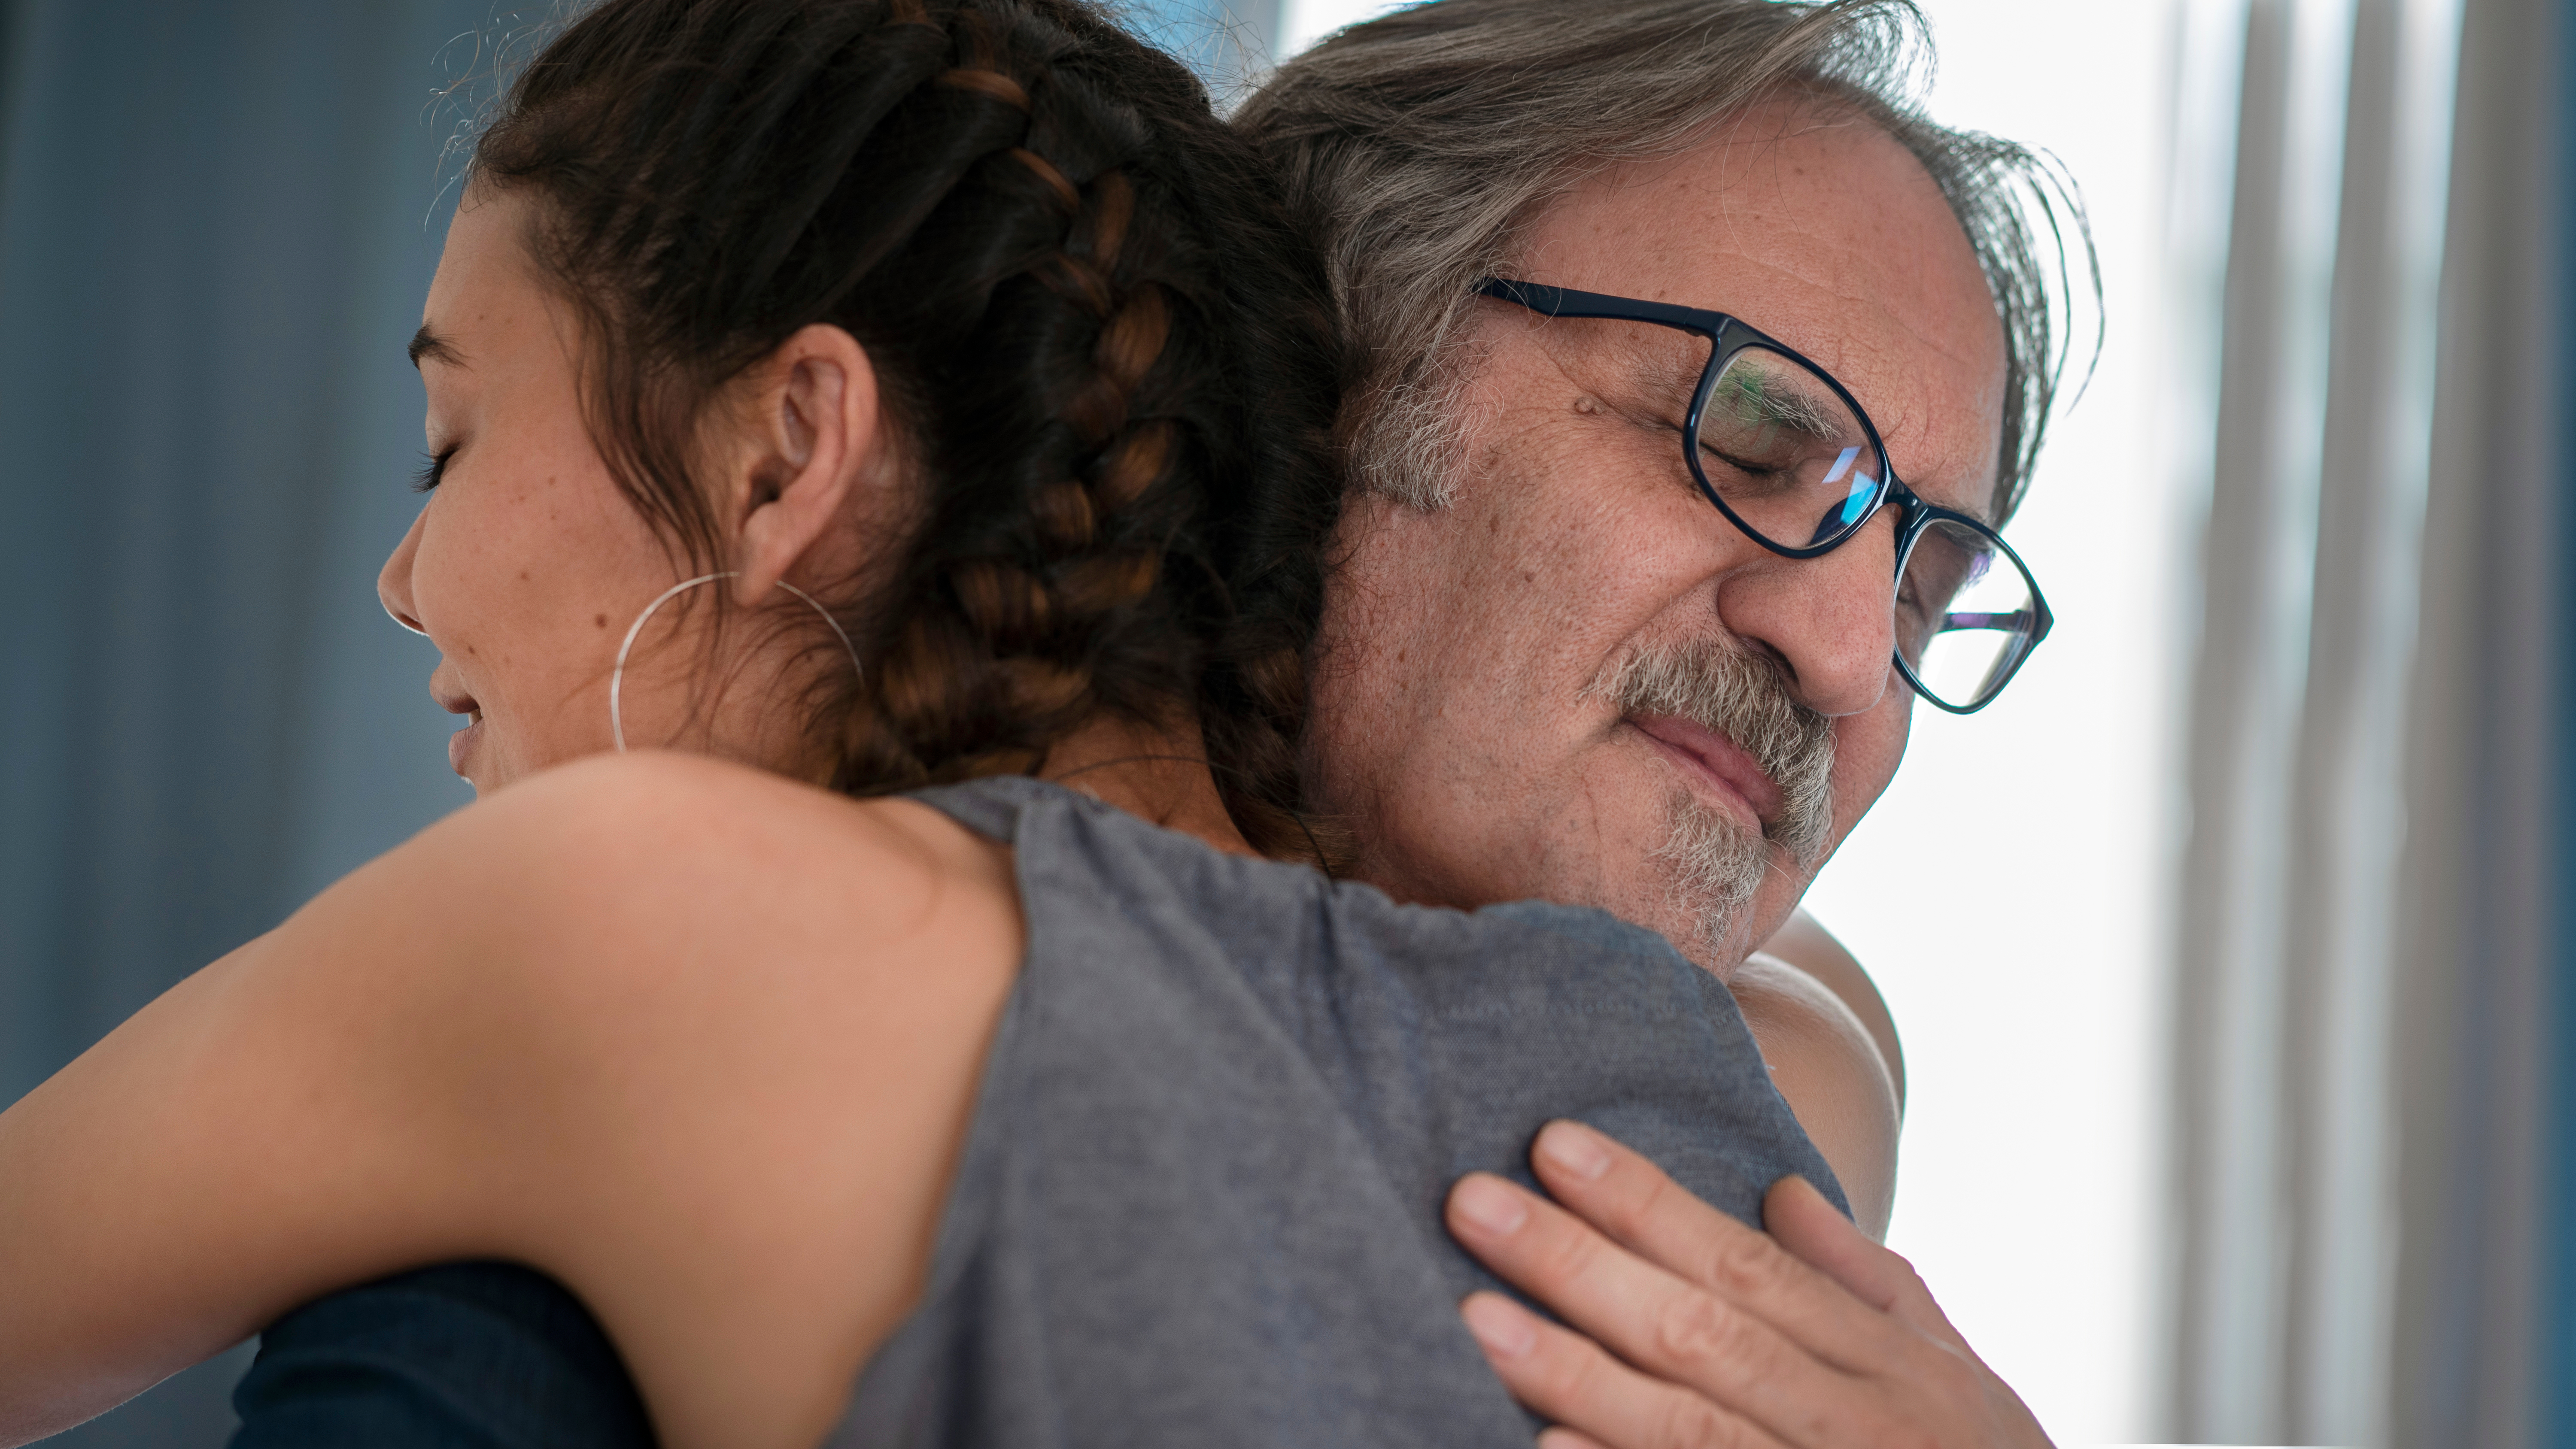 A senior father embracing his adult daughter | Source: Shutterstock